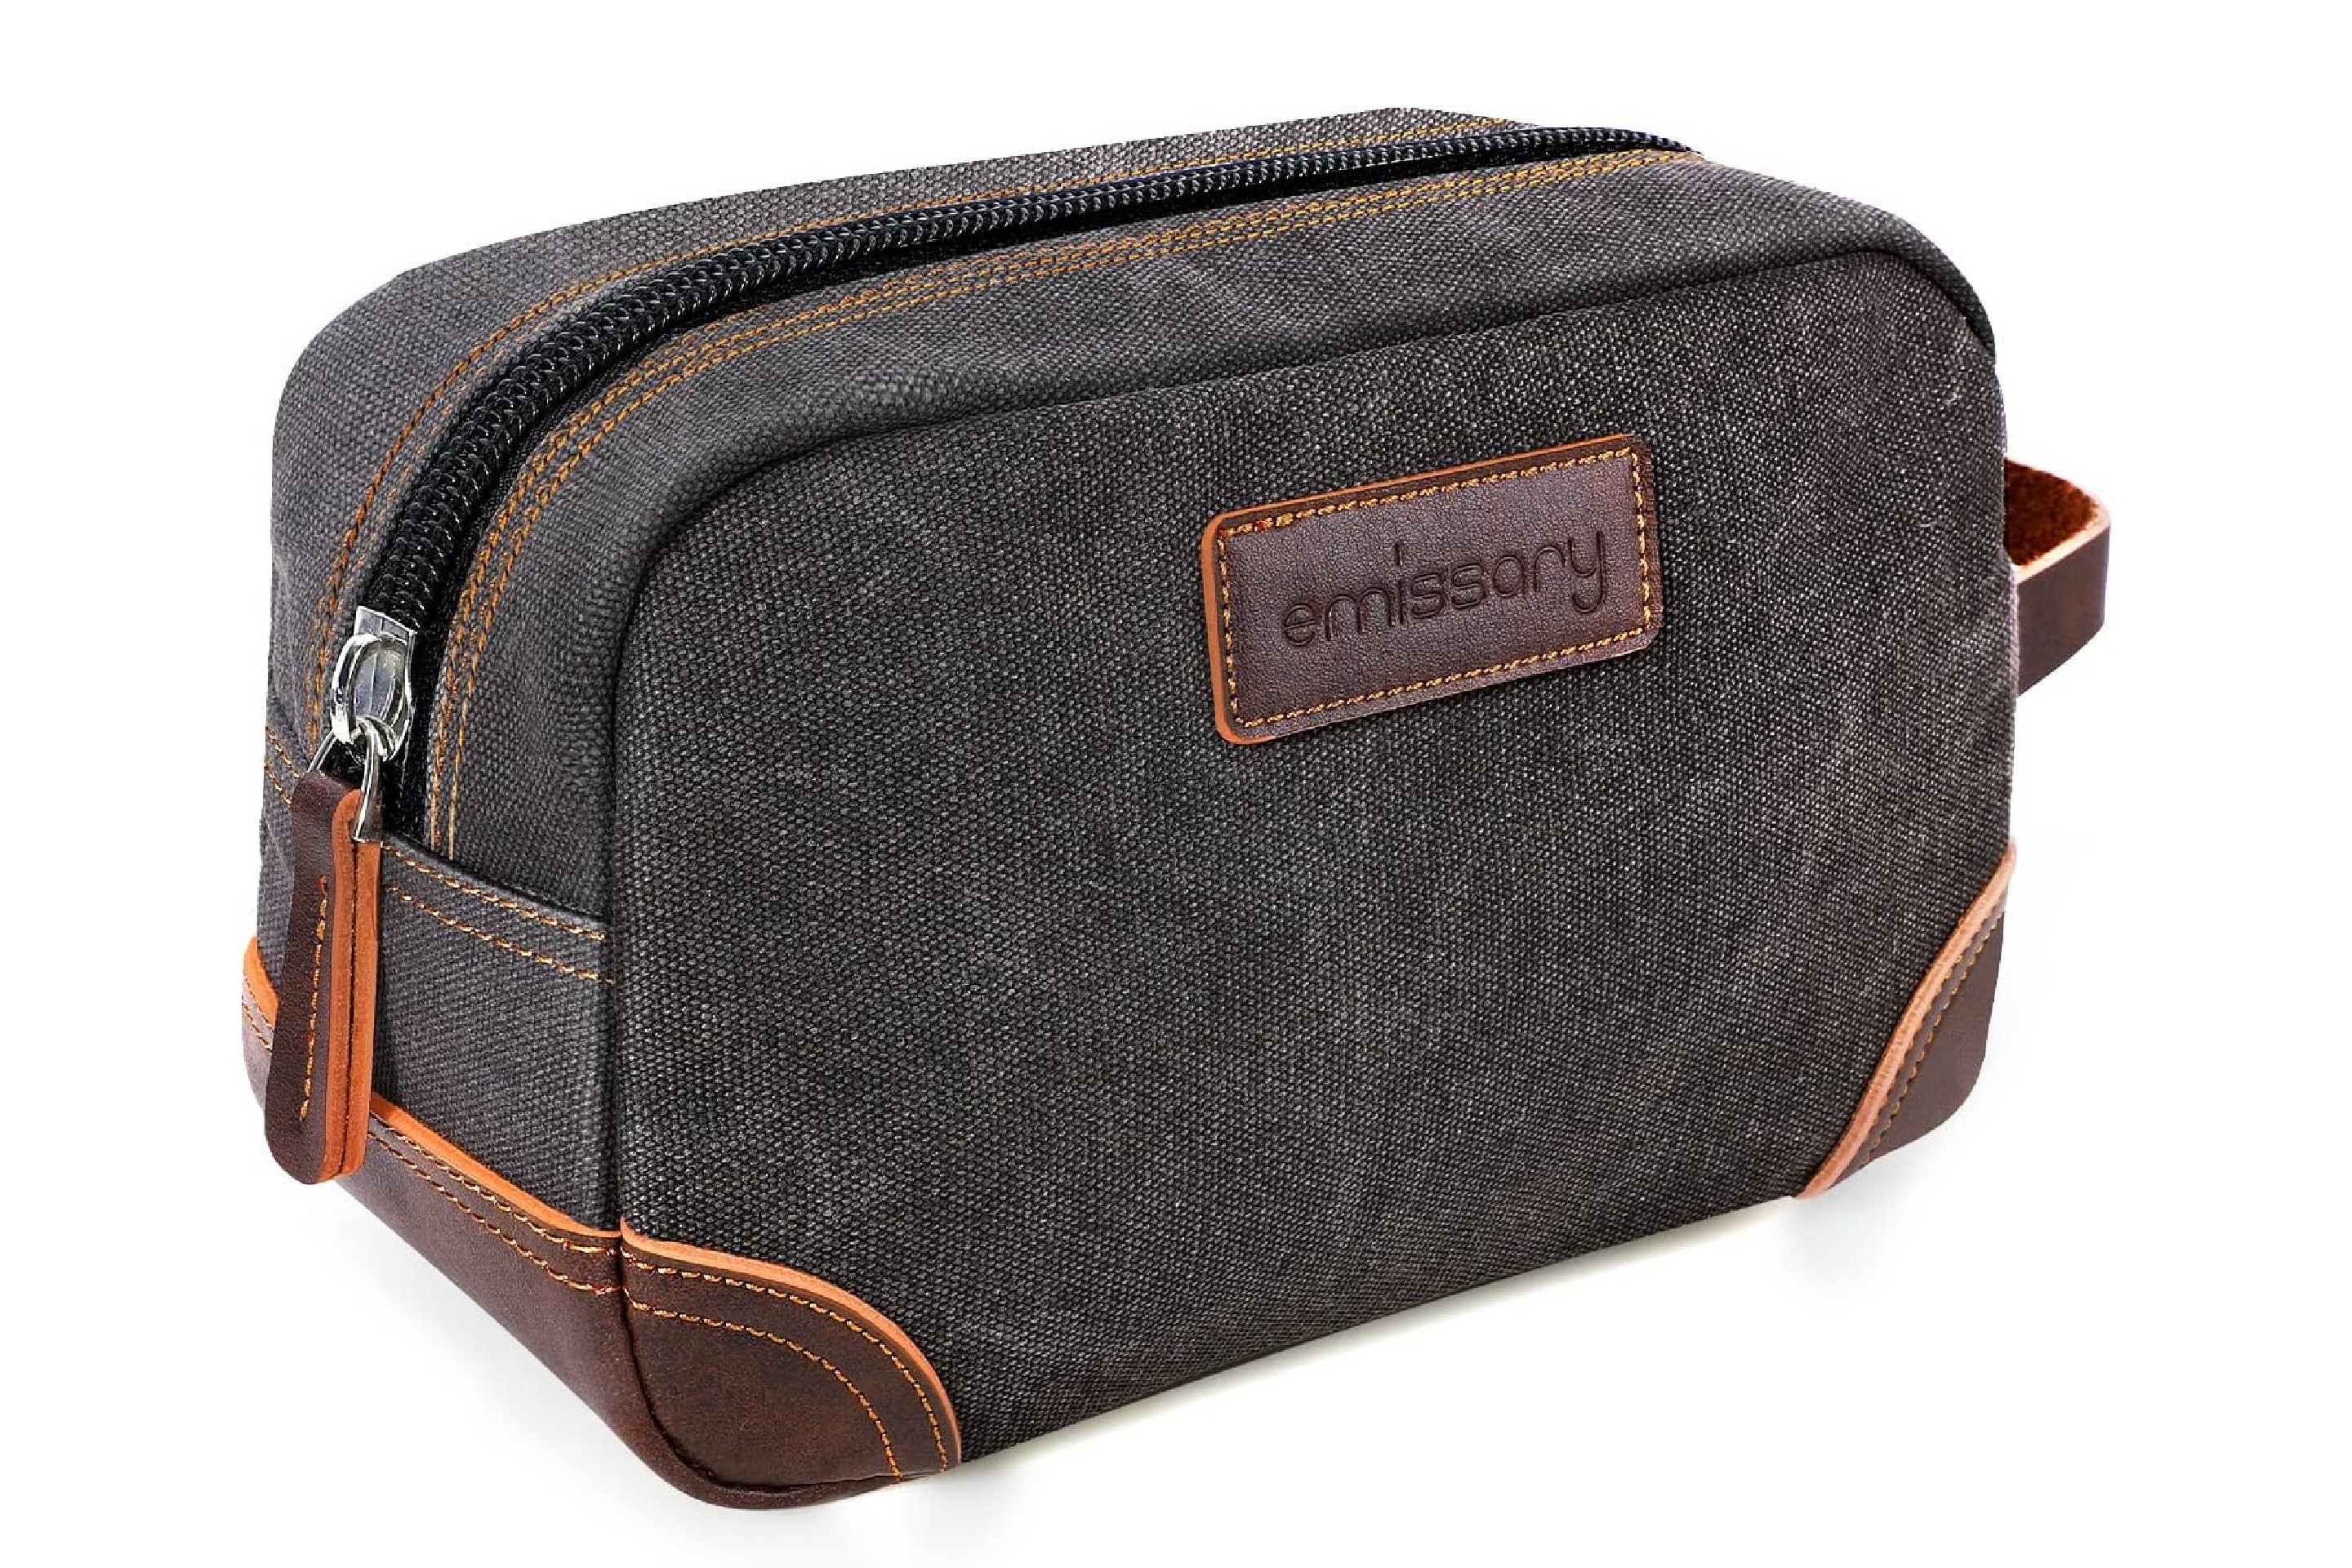 Discover the Best Toiletry Bag for Men – Vellaire